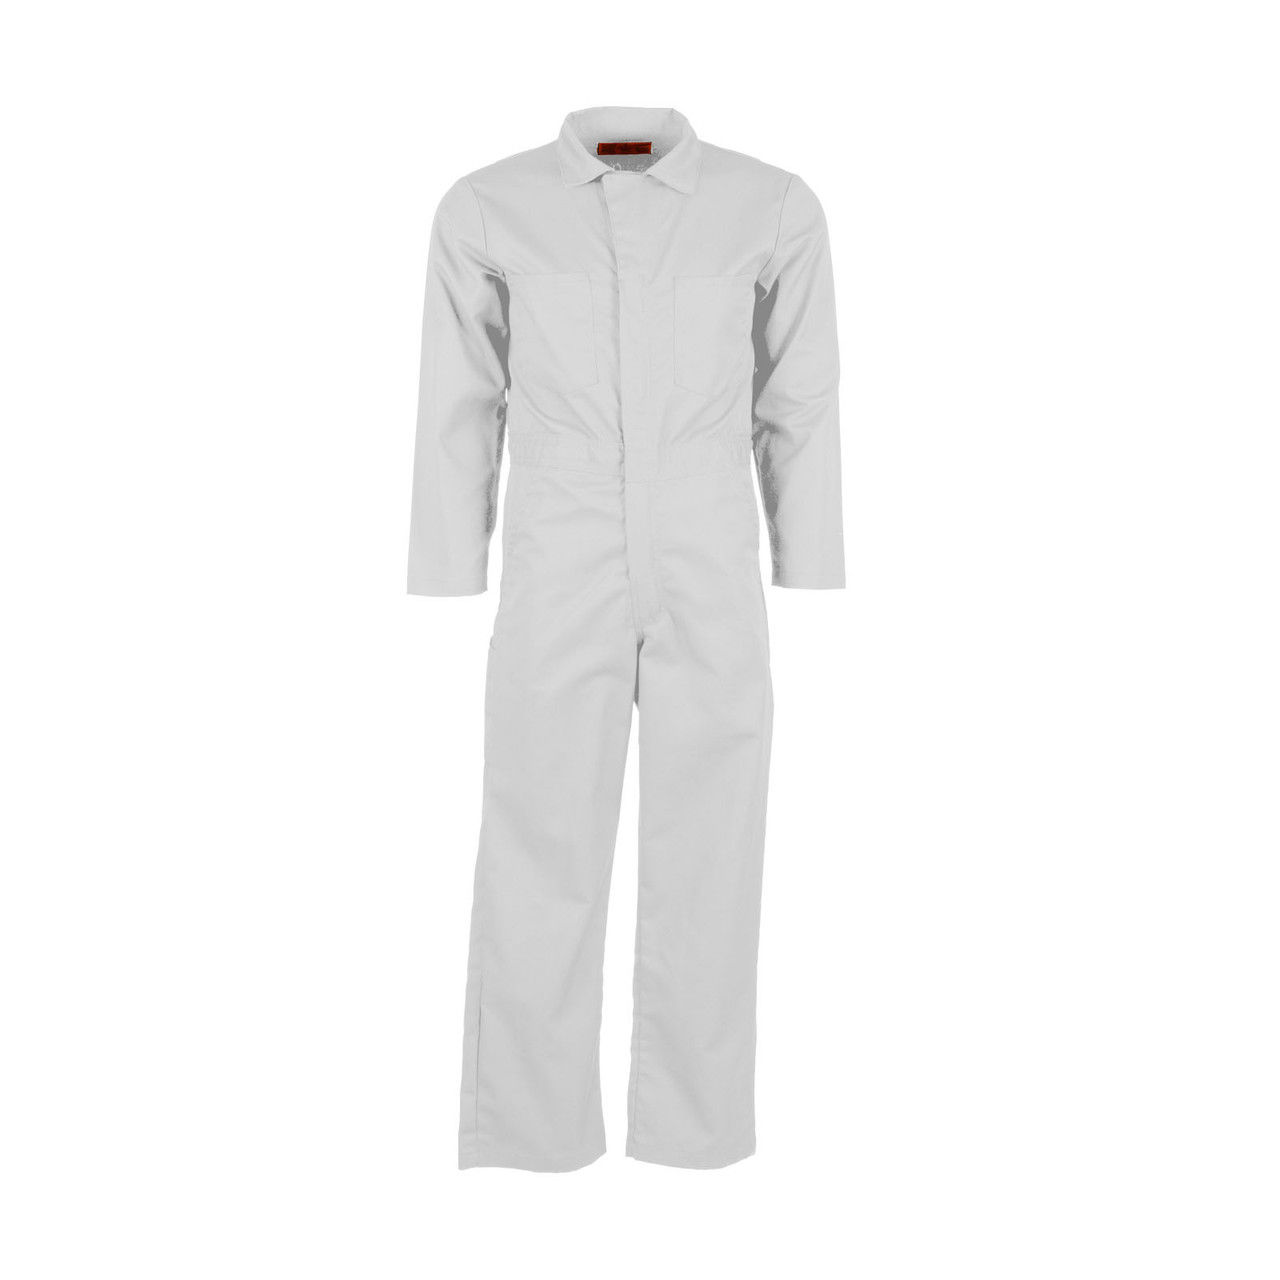 What is the fabric makeup of the white coveralls?